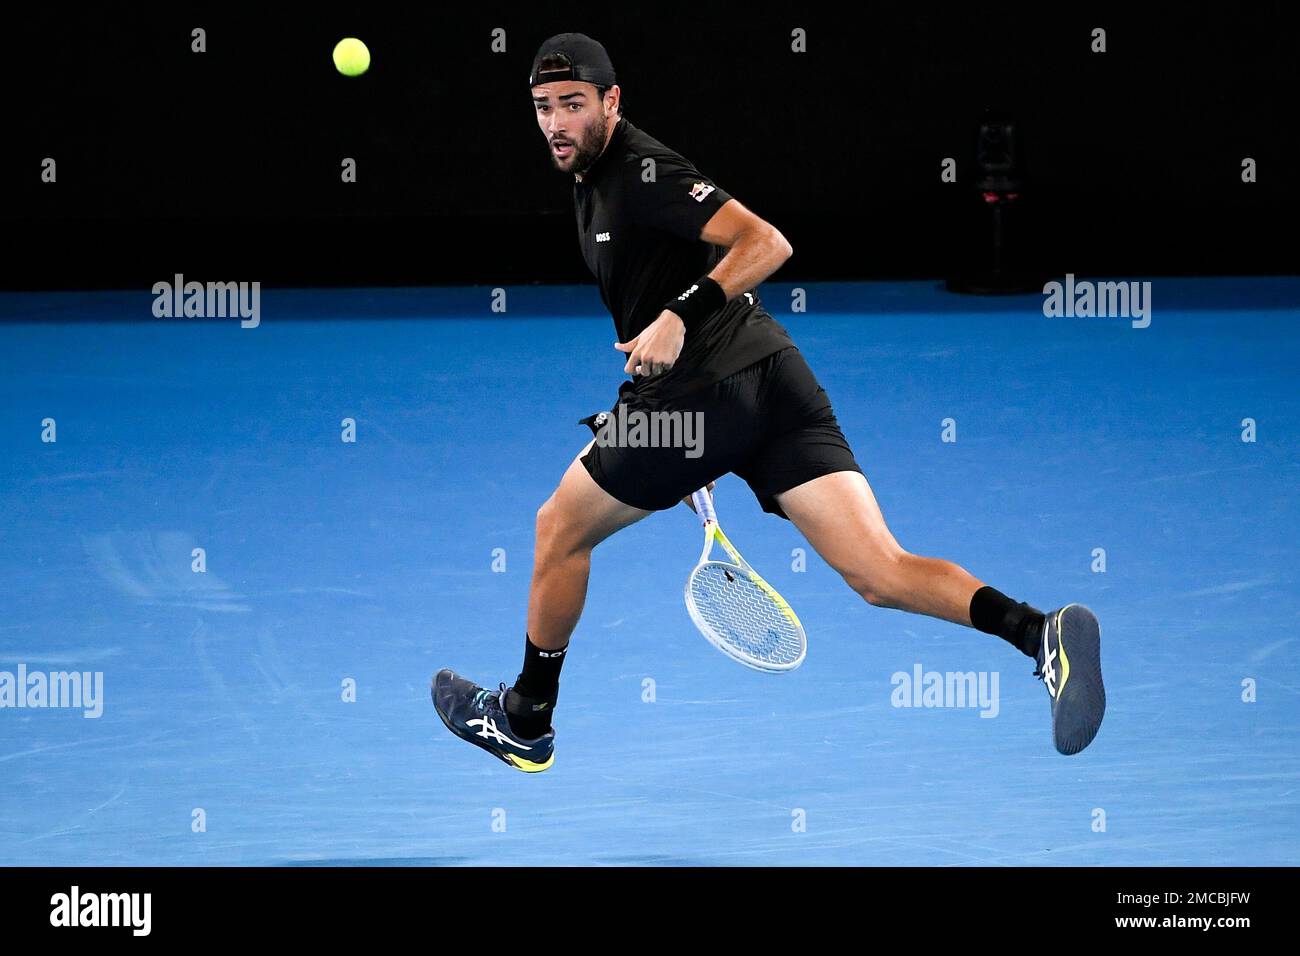 Matteo Berrettini of Italy plays a shot between his legs to Gael Monfils of France during their quarterfinal match at the Australian Open tennis championships in Melbourne, Australia, Tuesday, Jan